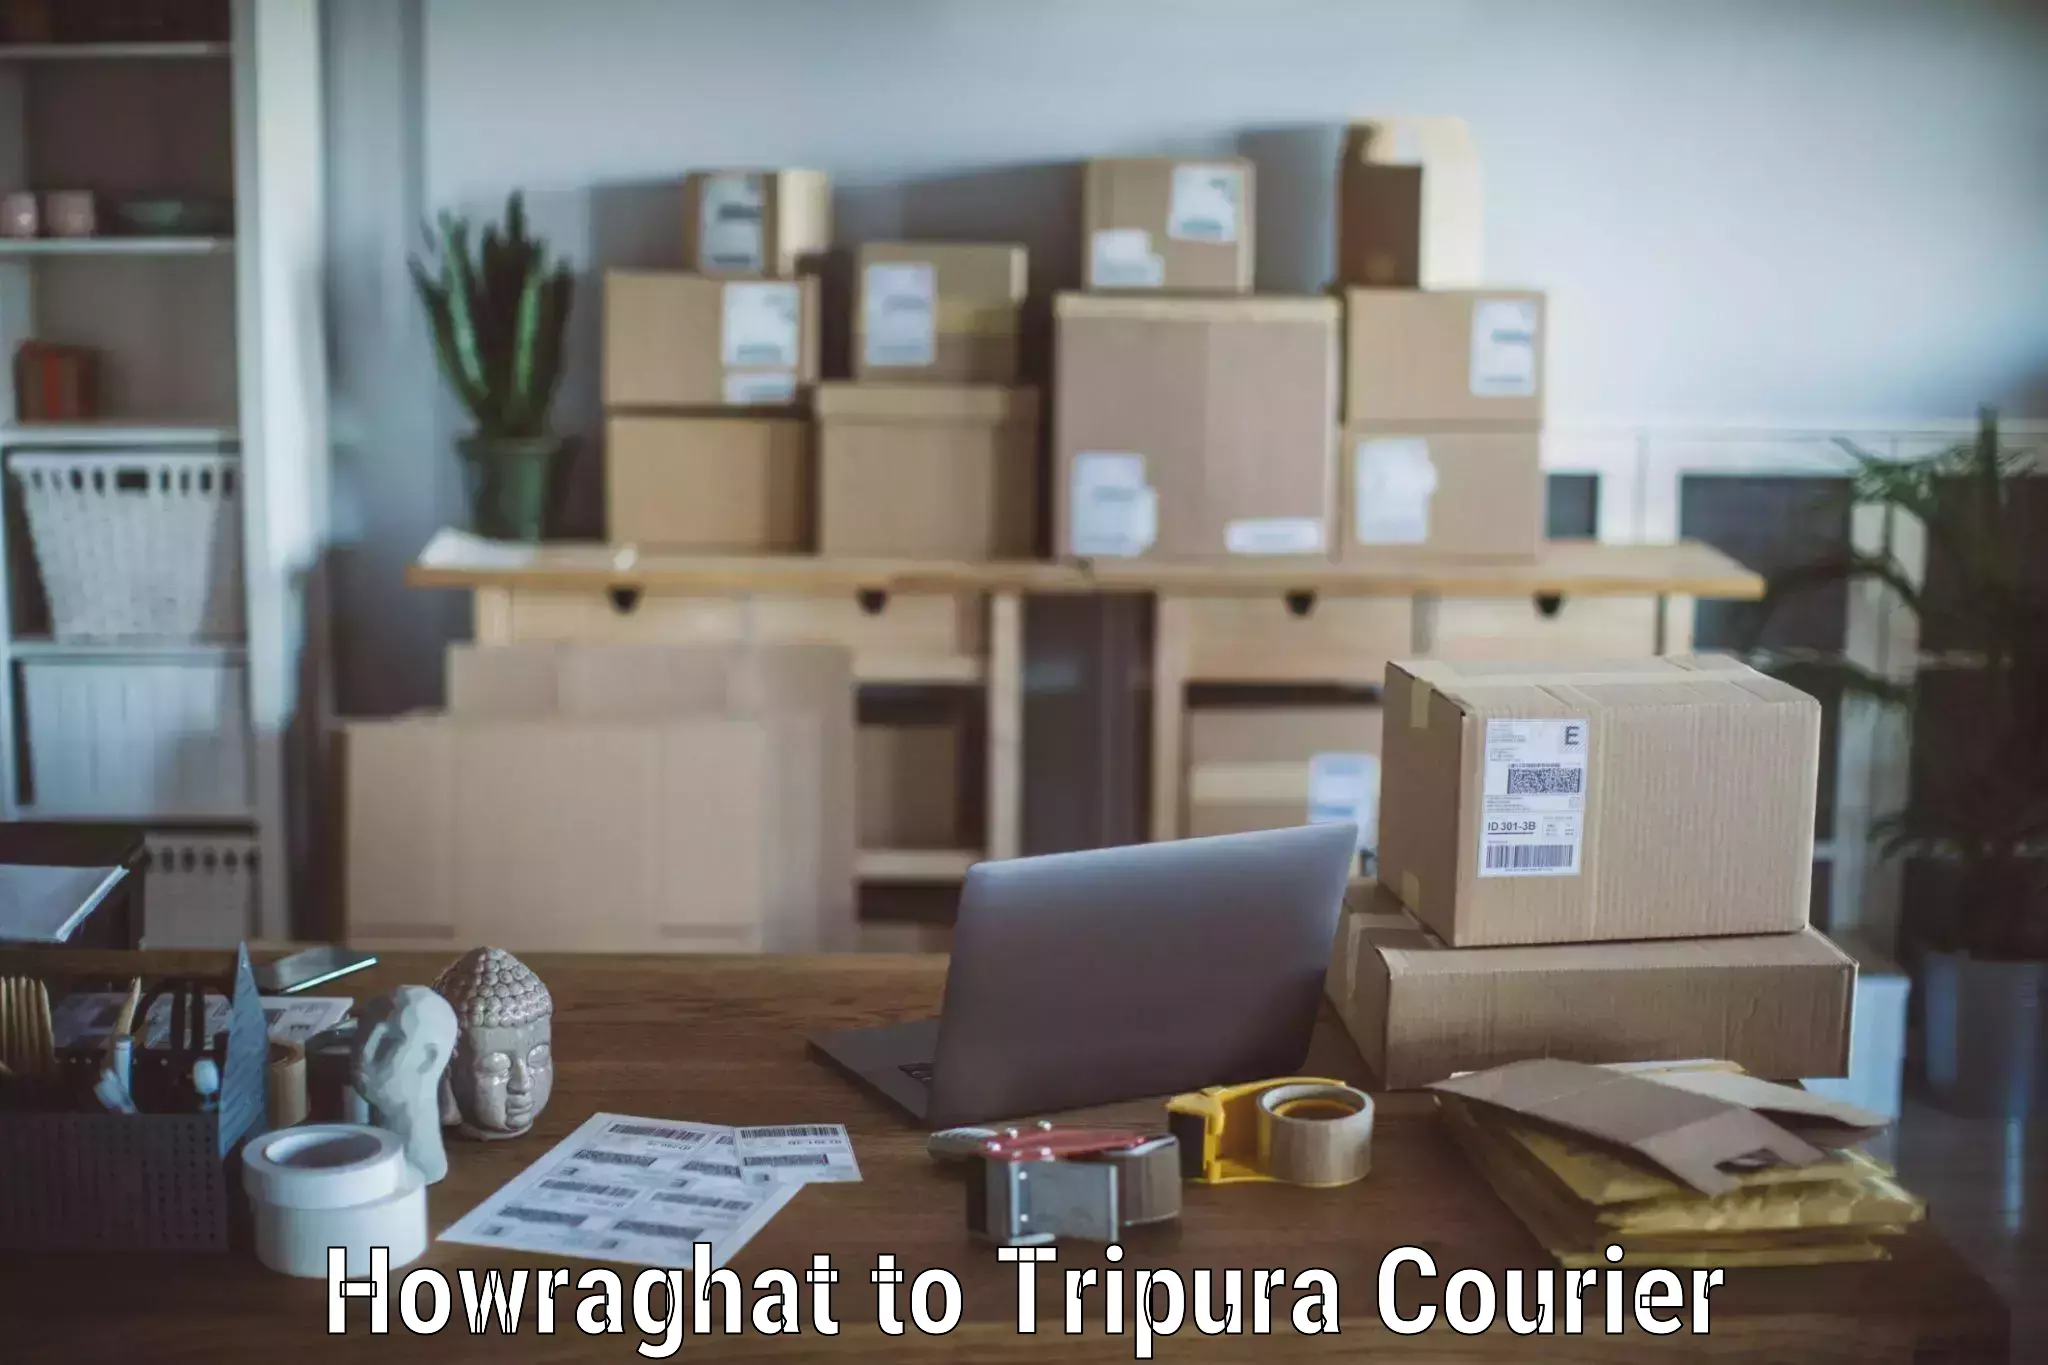 Professional home relocation Howraghat to Udaipur Tripura